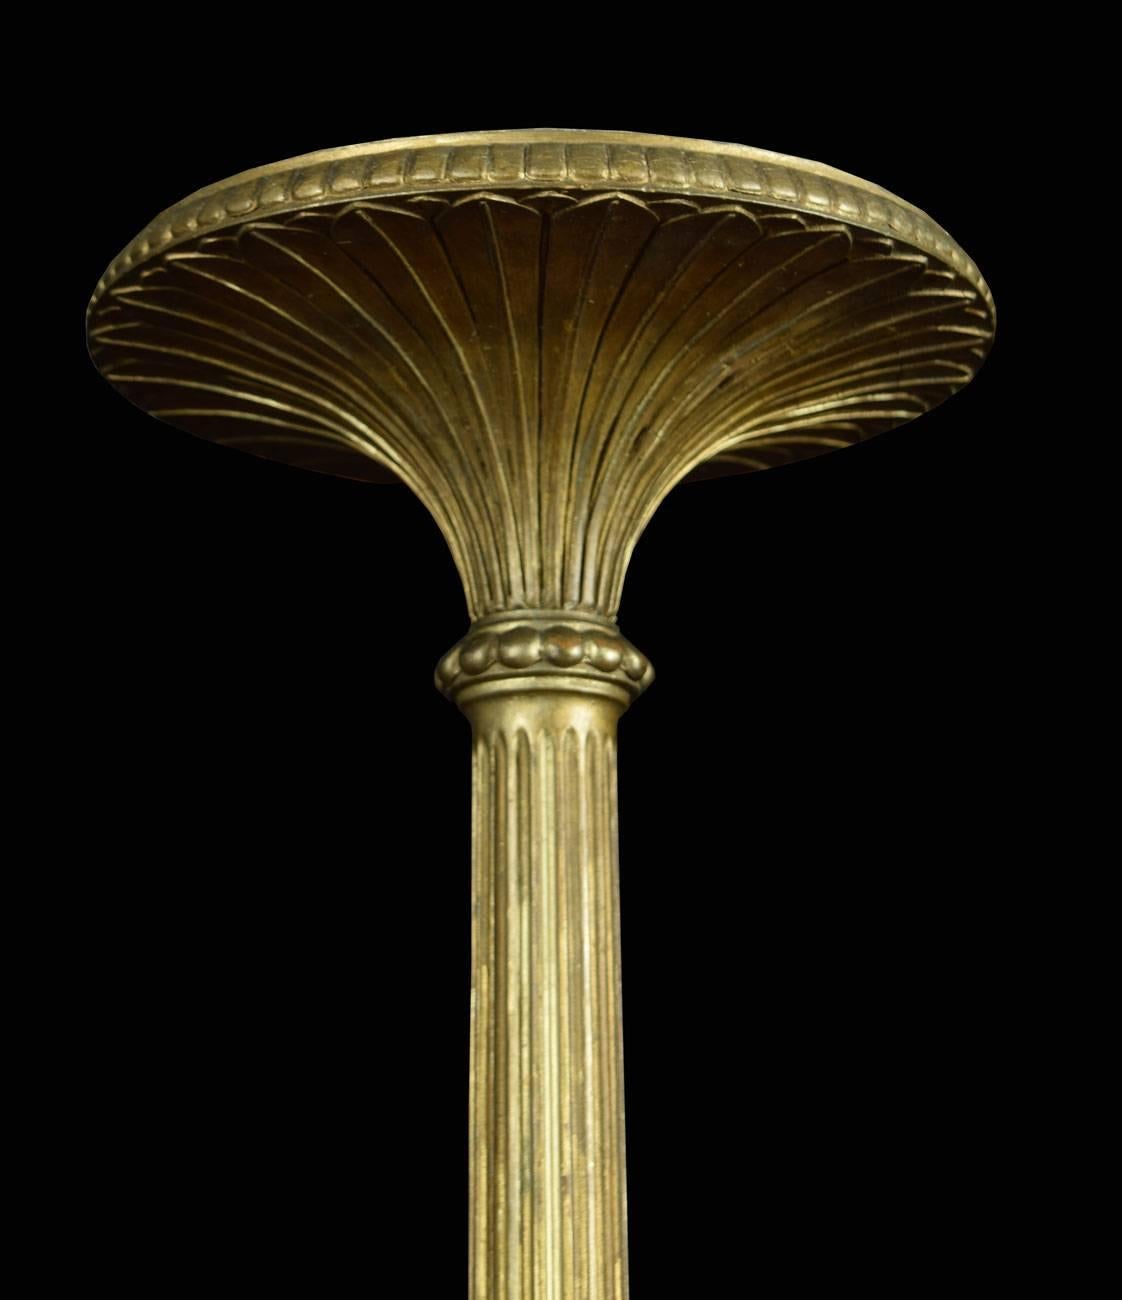 Late 19th qcentury giltwood torchere with circular top above the fluted reeded column and acanthus clad circular base with square plinth.

Dimensions:

Height: 56 inches.

Diameter of top: 11 inches.